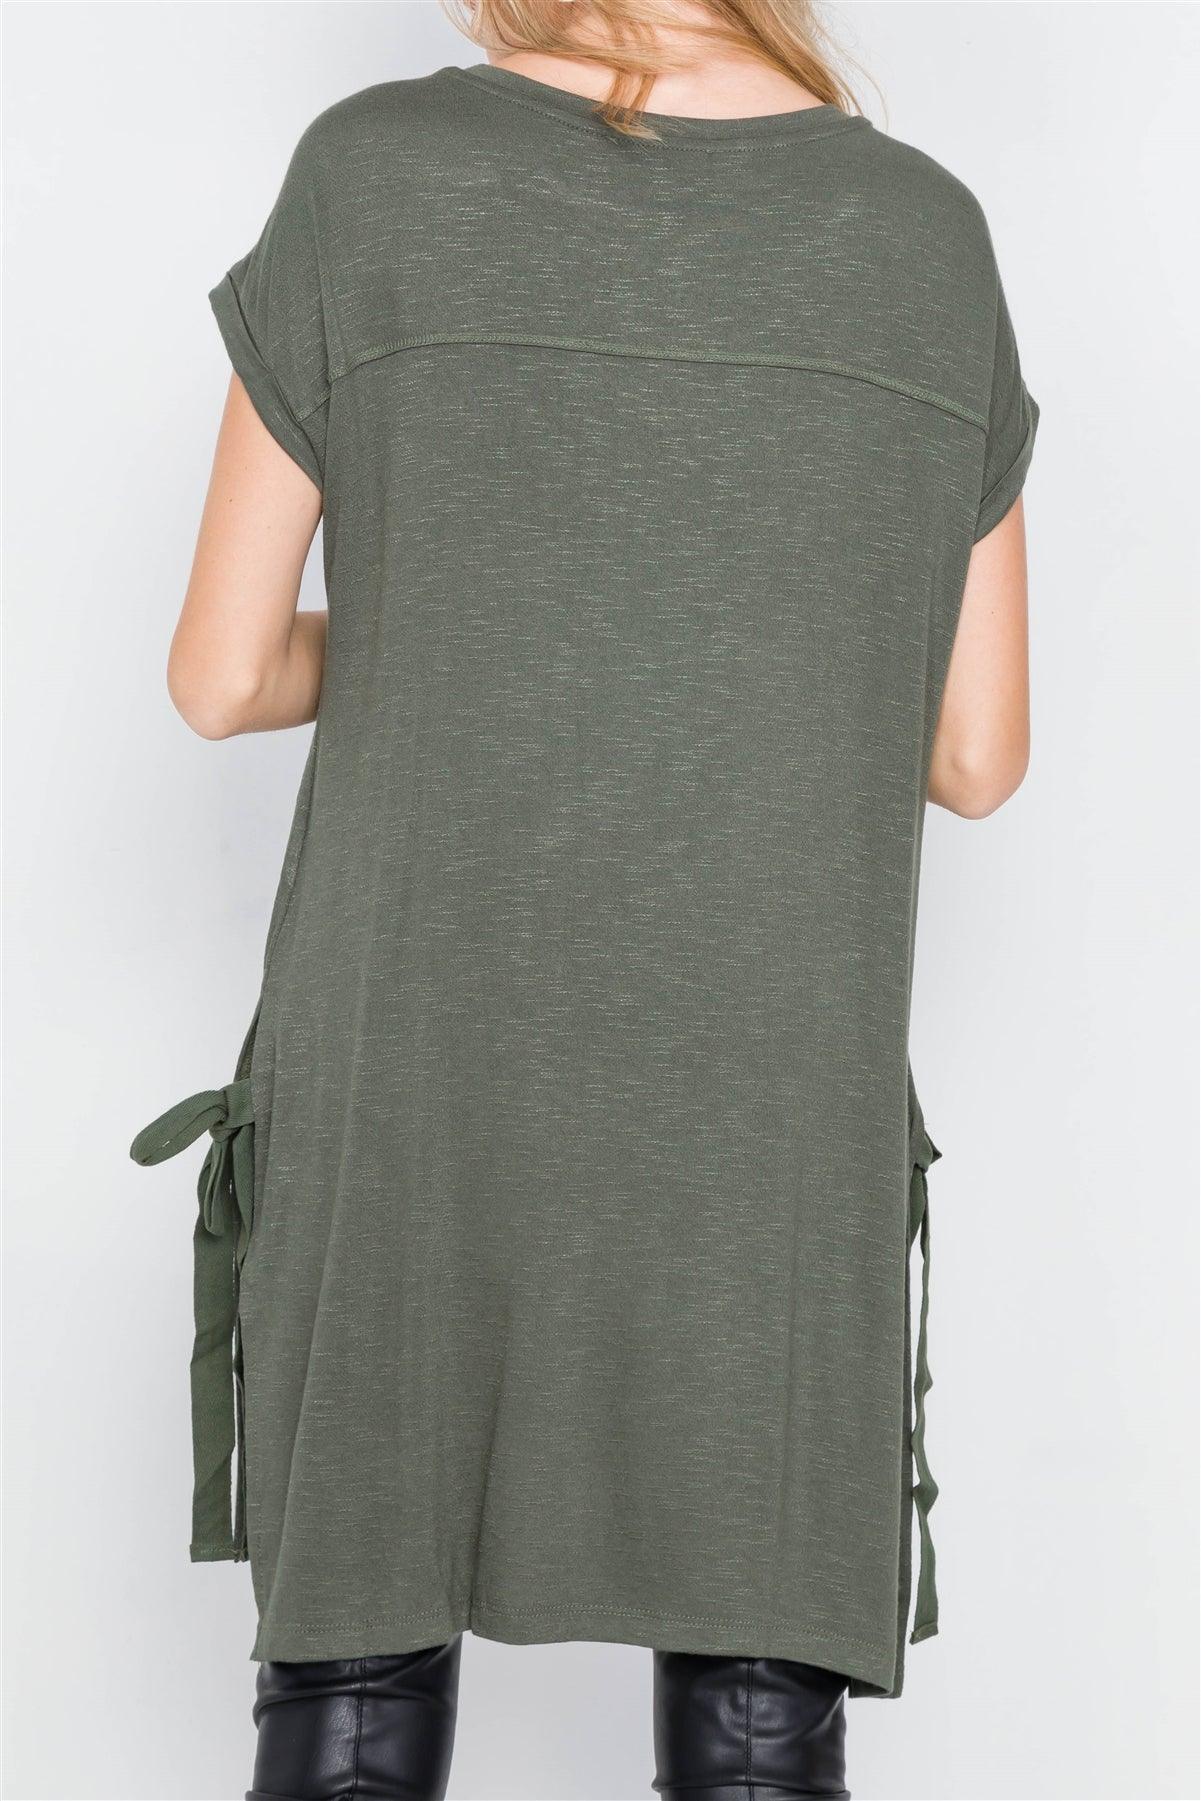 Olive High-Low Rolled Sleeves Side Slit Self-Tie Tunic Top /2-3-1